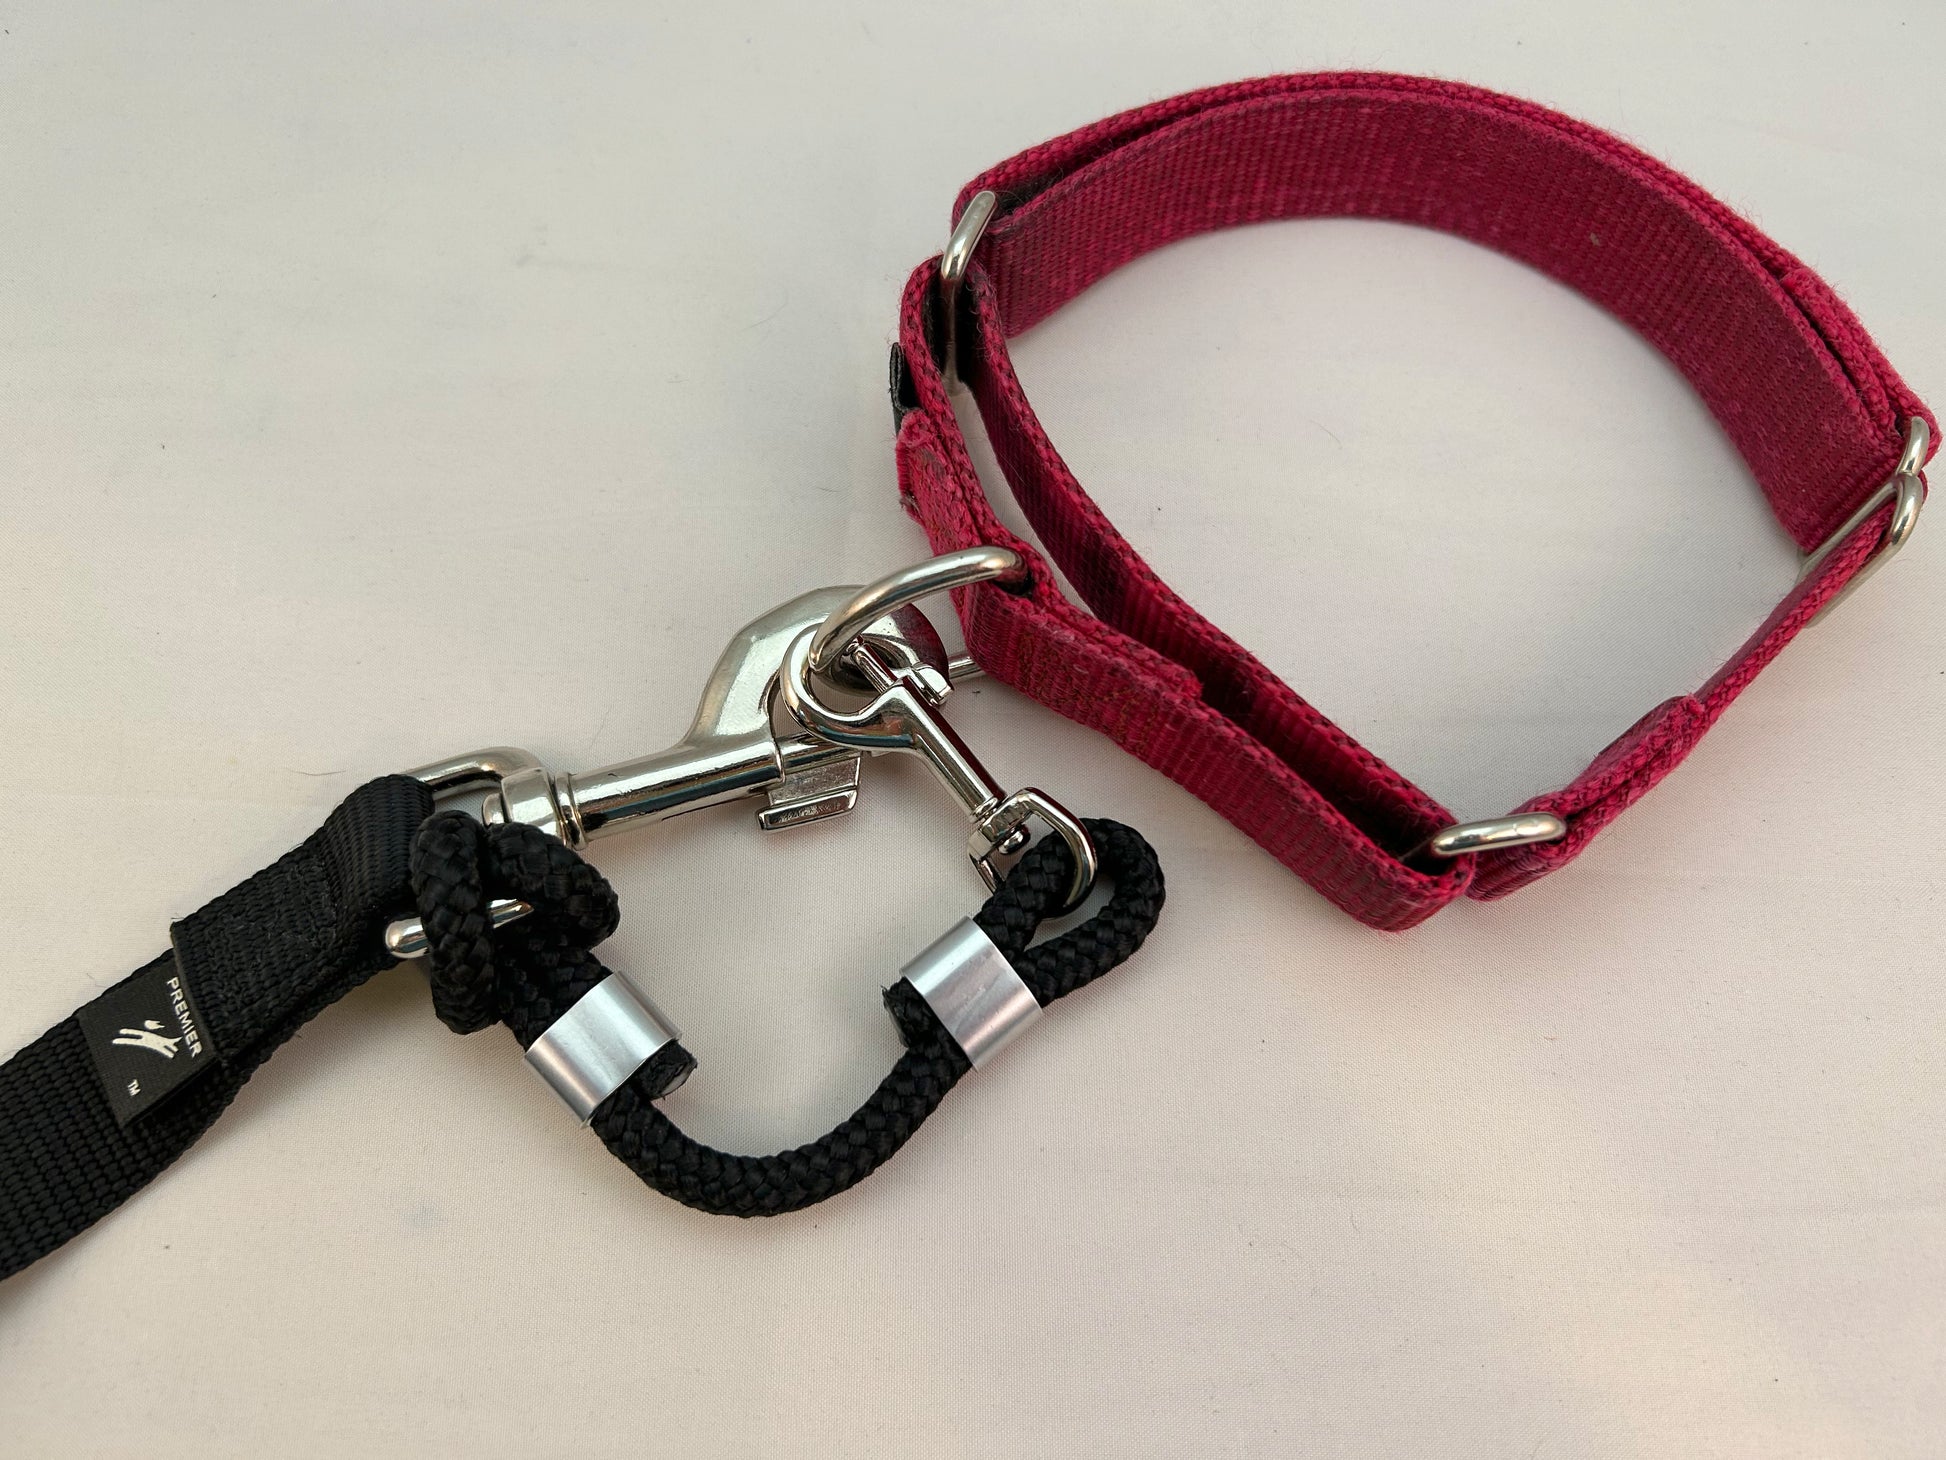 One way to attach the leash safety strap to collar